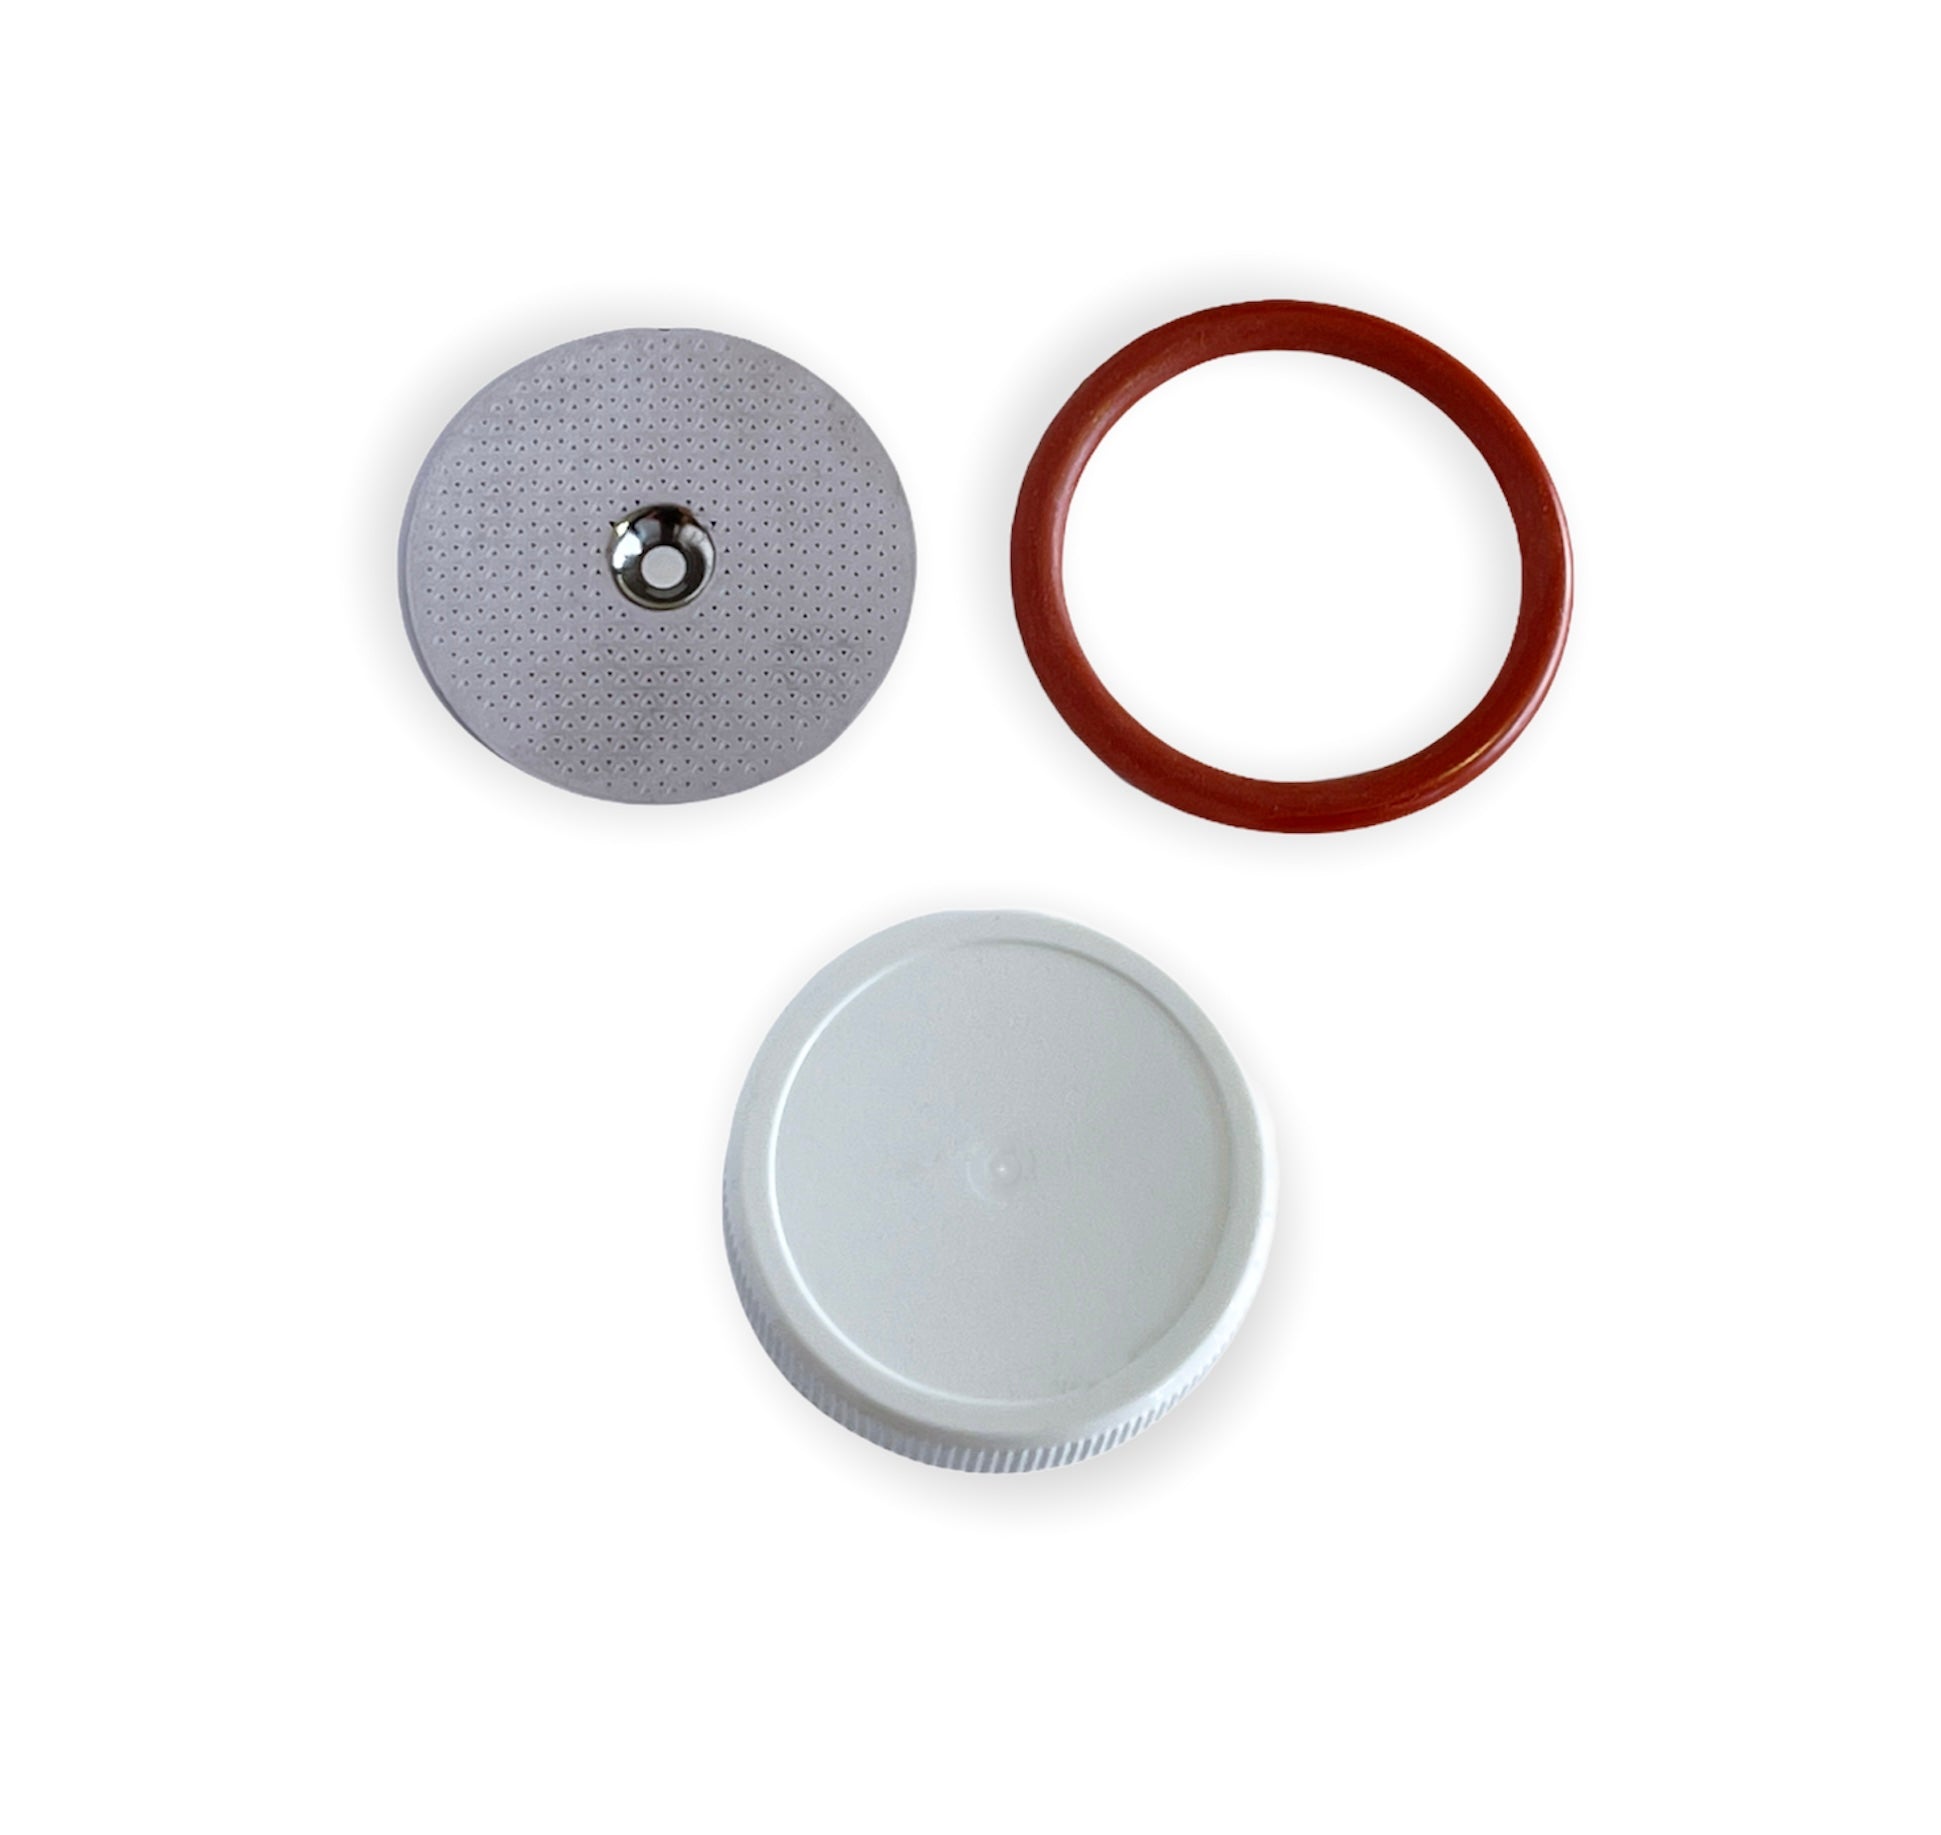 Basic items to replace on a regular basis to keep your machine clean and deliver a great coffee., shower screen filter, brew unit seal and food grade grease